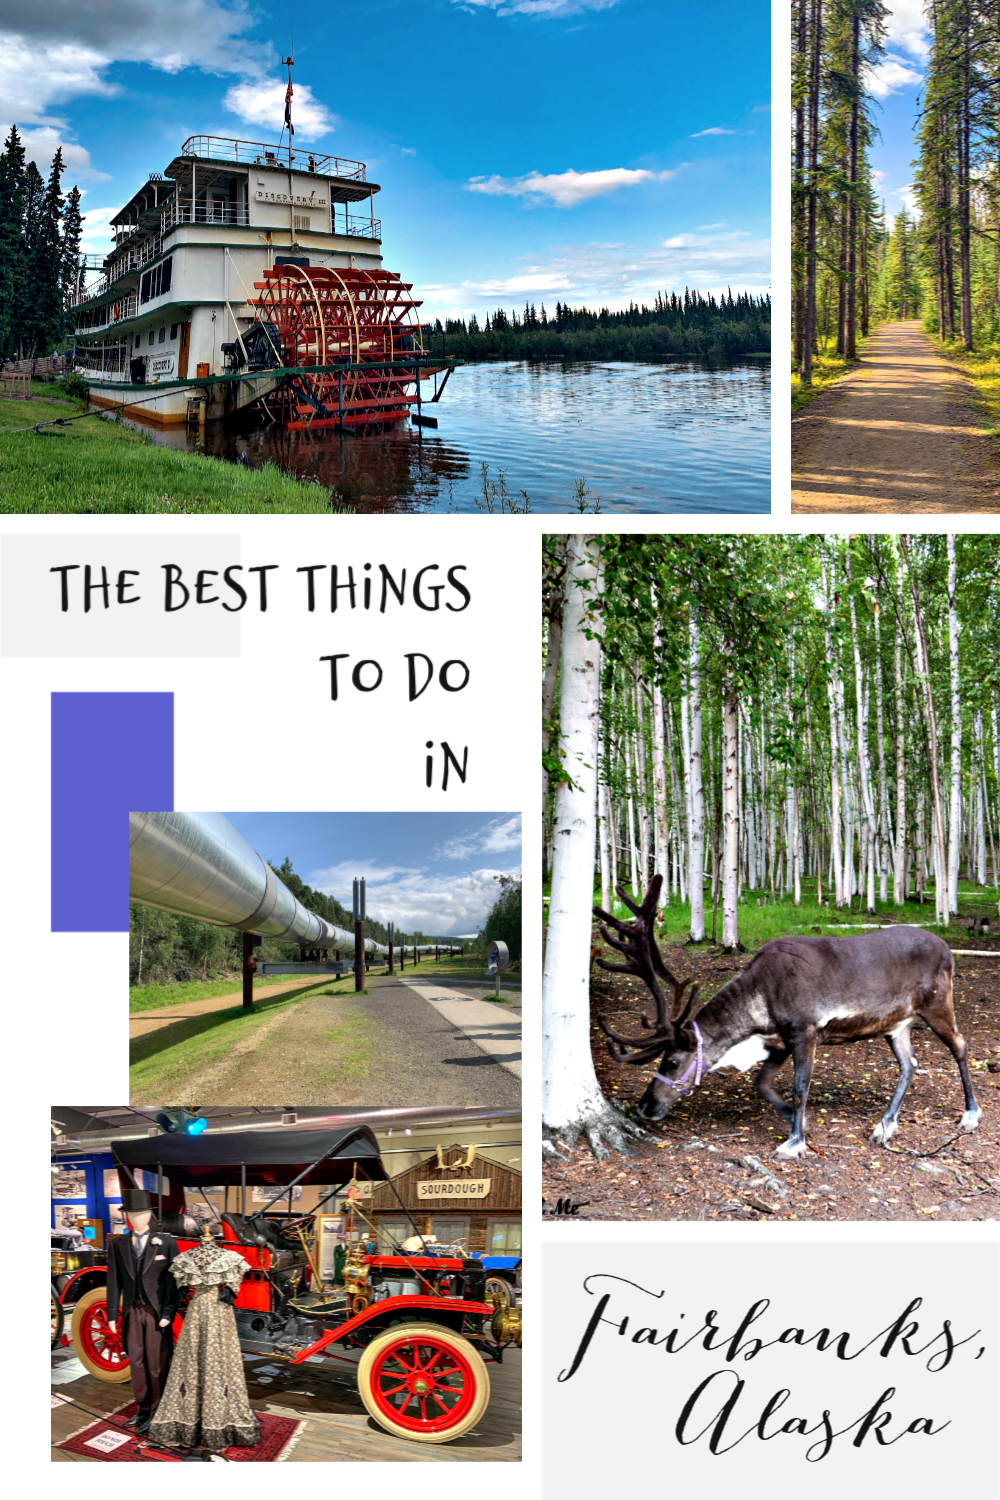 A visit to Fairbanks can be the perfect introduction to Alaska. In Fairbanks you can learn all about what makes Alaska special. Read on for fun things to do in Fairbanks. Alaska. #Alaskatravels #thingstodoinAlaska